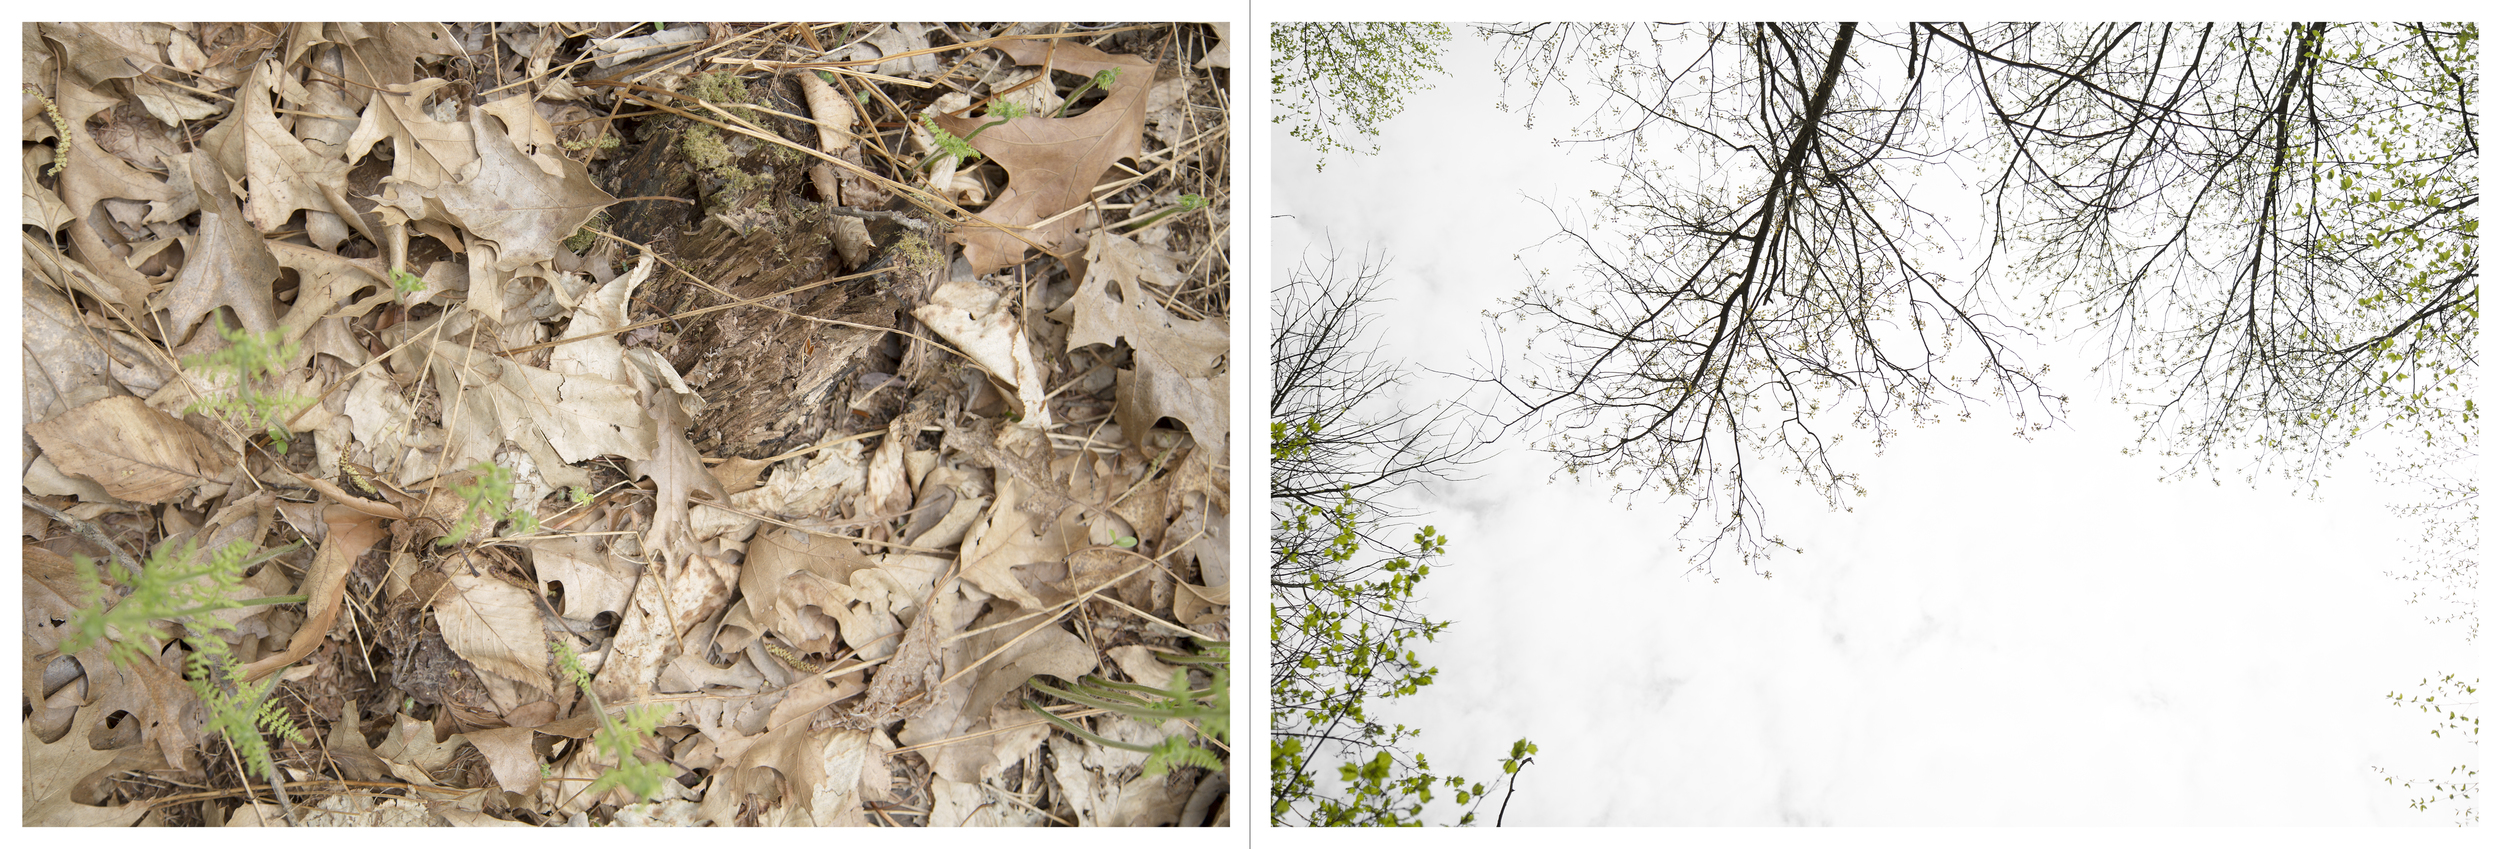 And so on and so forth in much the same vein: Logging Road, Inkjet Photograph, 24" X 72," 2015.